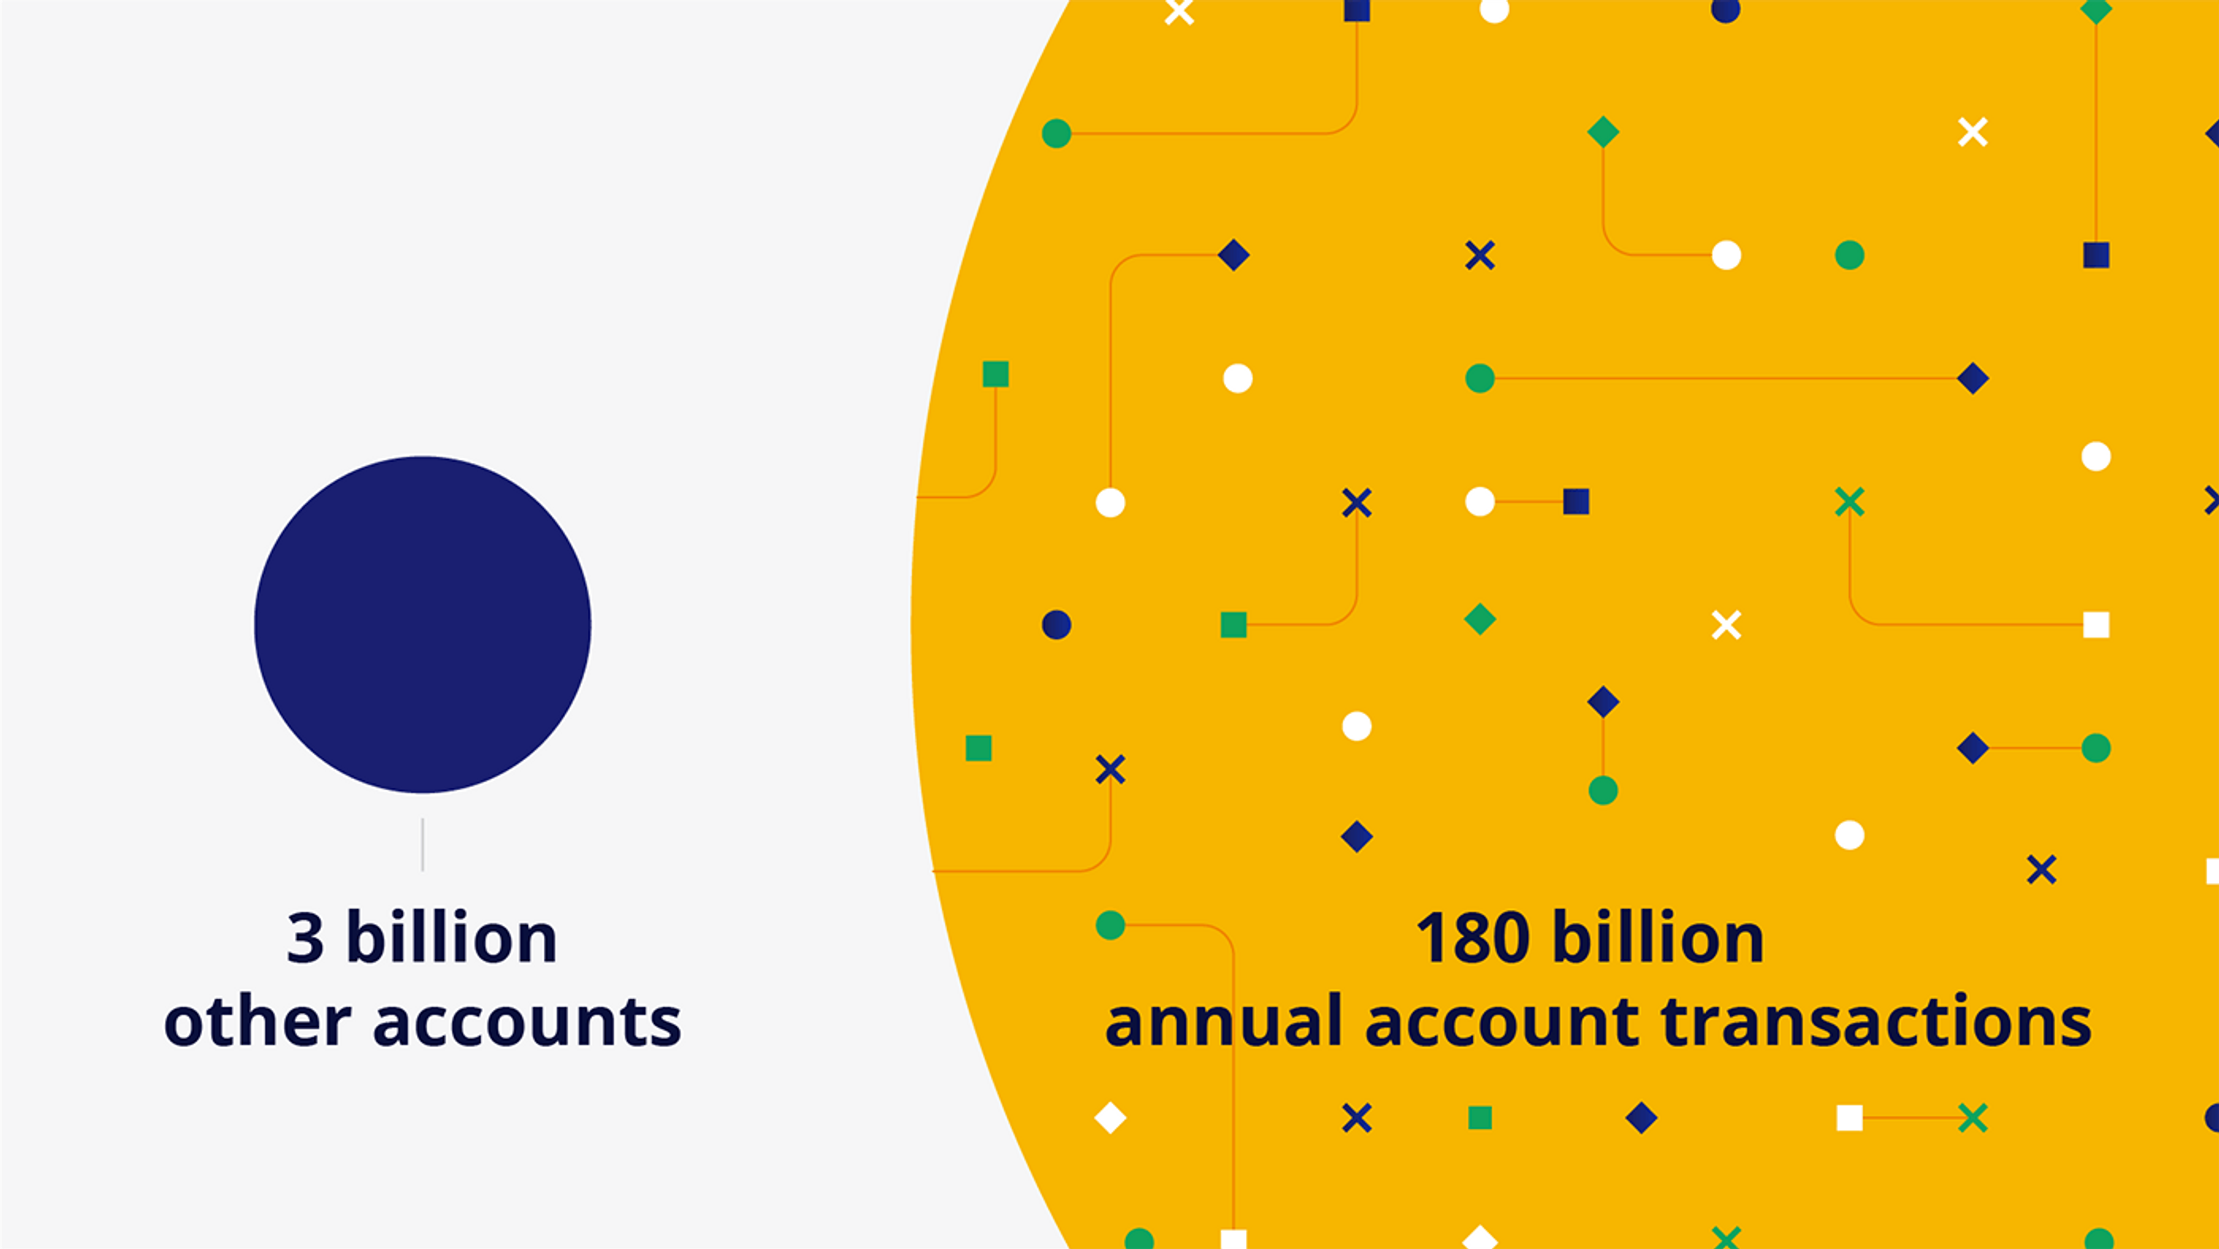 A graphic explaining how Visa compares a users' transactions to 3 billion other accounts with around 180 billion annual account transactions.